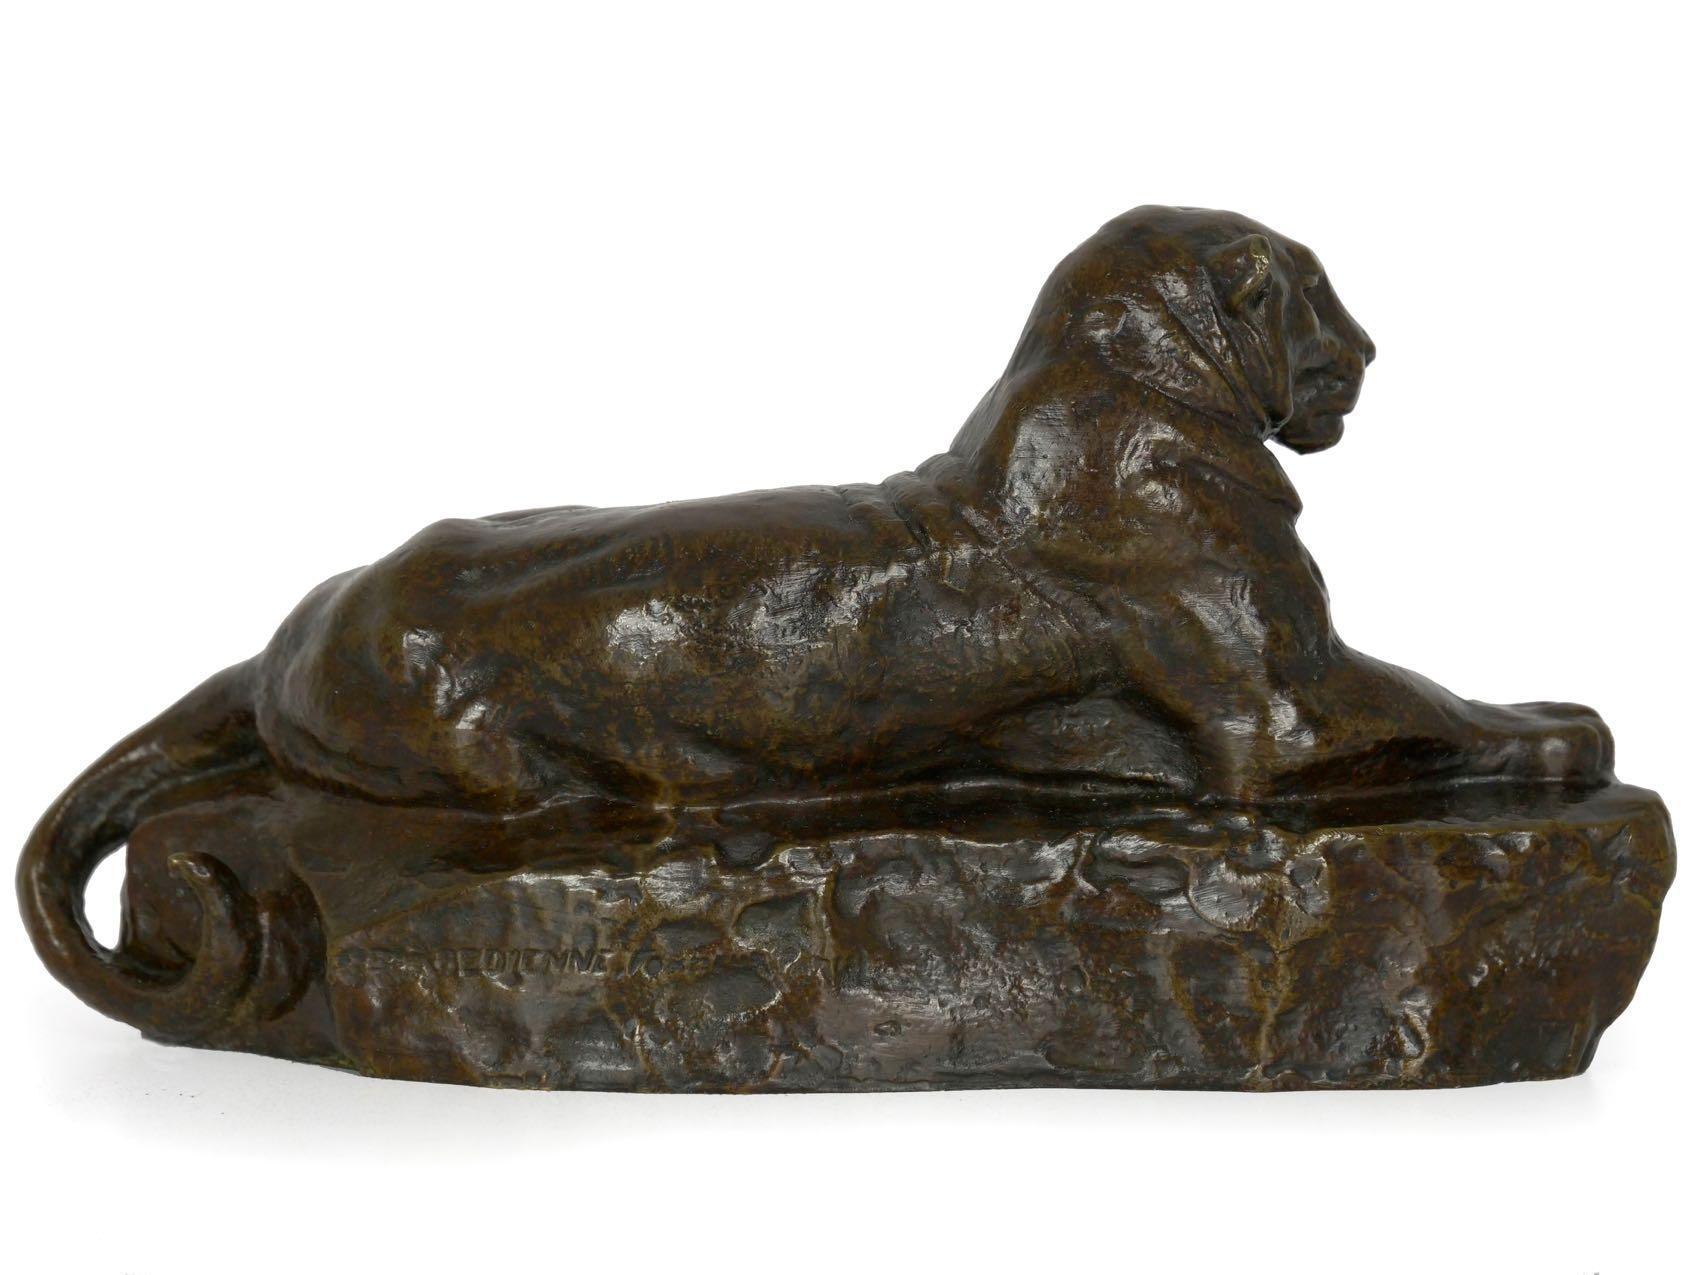 Cast by the firm of Ferdinand Barbedienne, this model is generally identified in the earliest catalogues as “Panther of India No. 1“ and was originally listed in Barye’s catalogue of 1855, noted by Poletti as having exhibition in 1860. This is a